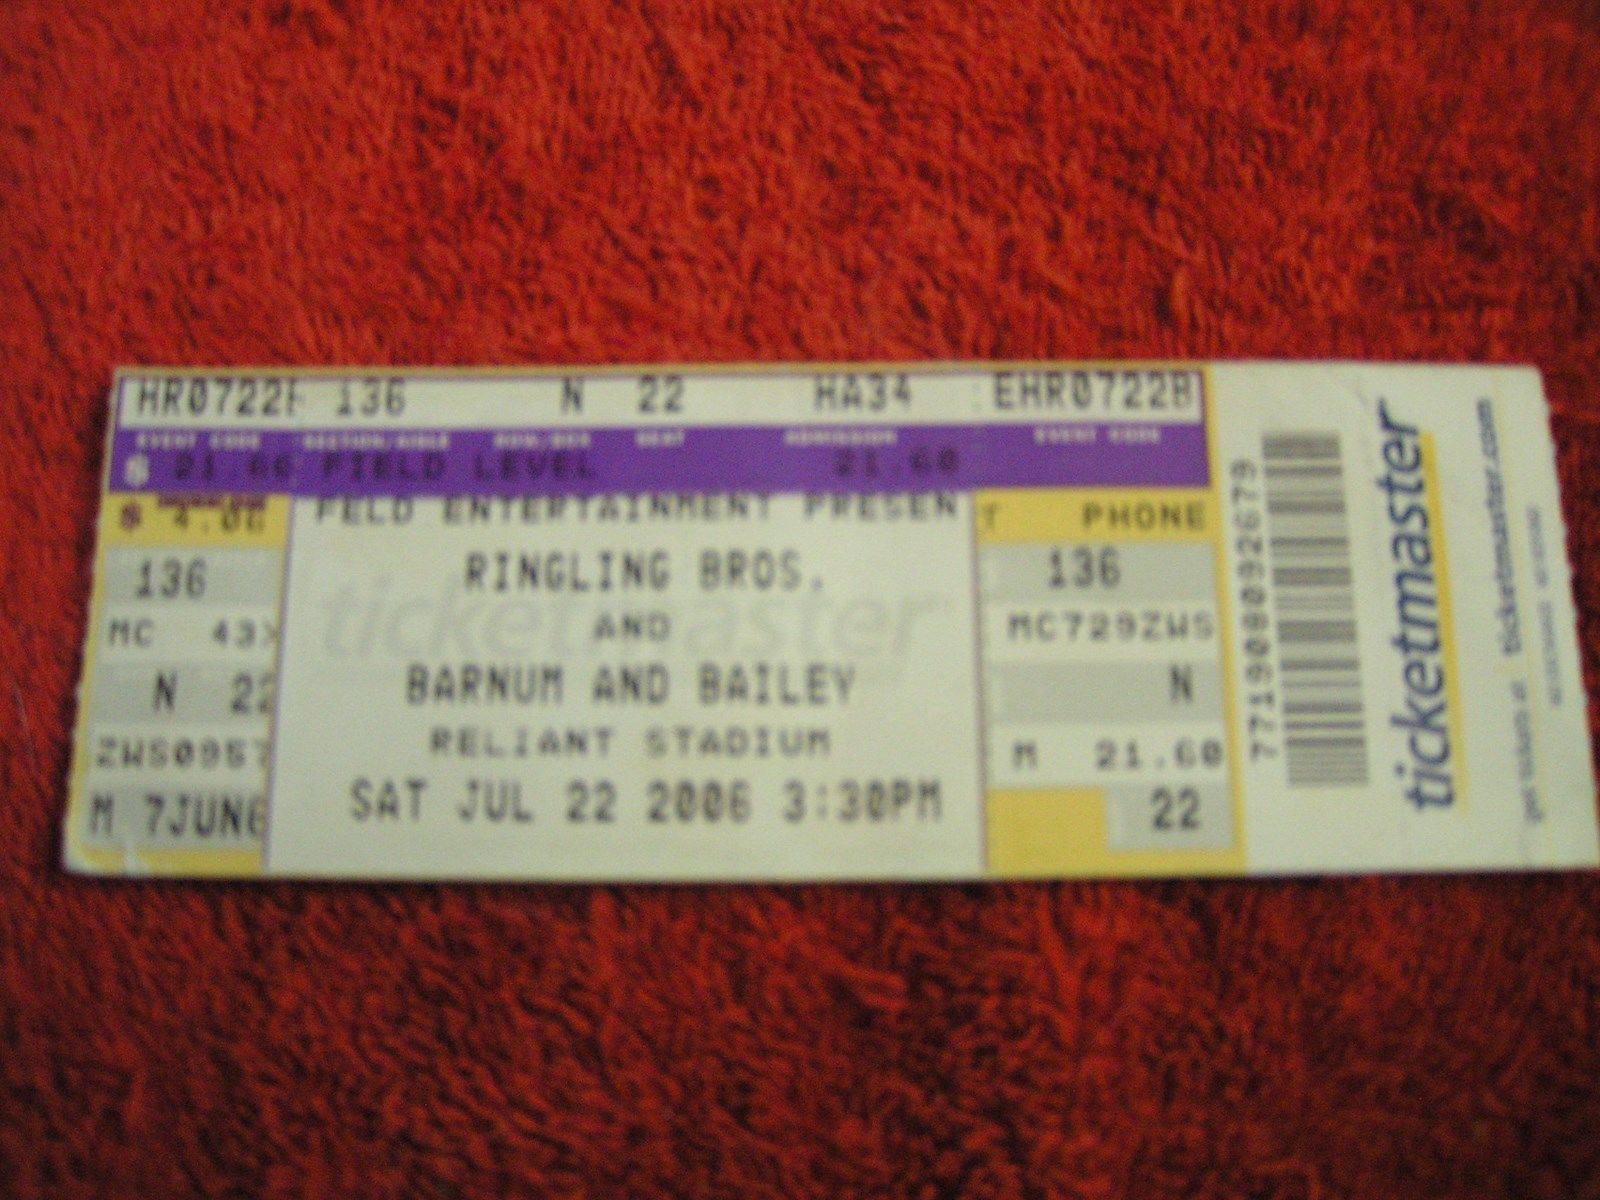 Primary image for Ringling Brothers & Barnum Bailey Circus Reliant Stadium TX 7/22/06 Ticket Stub